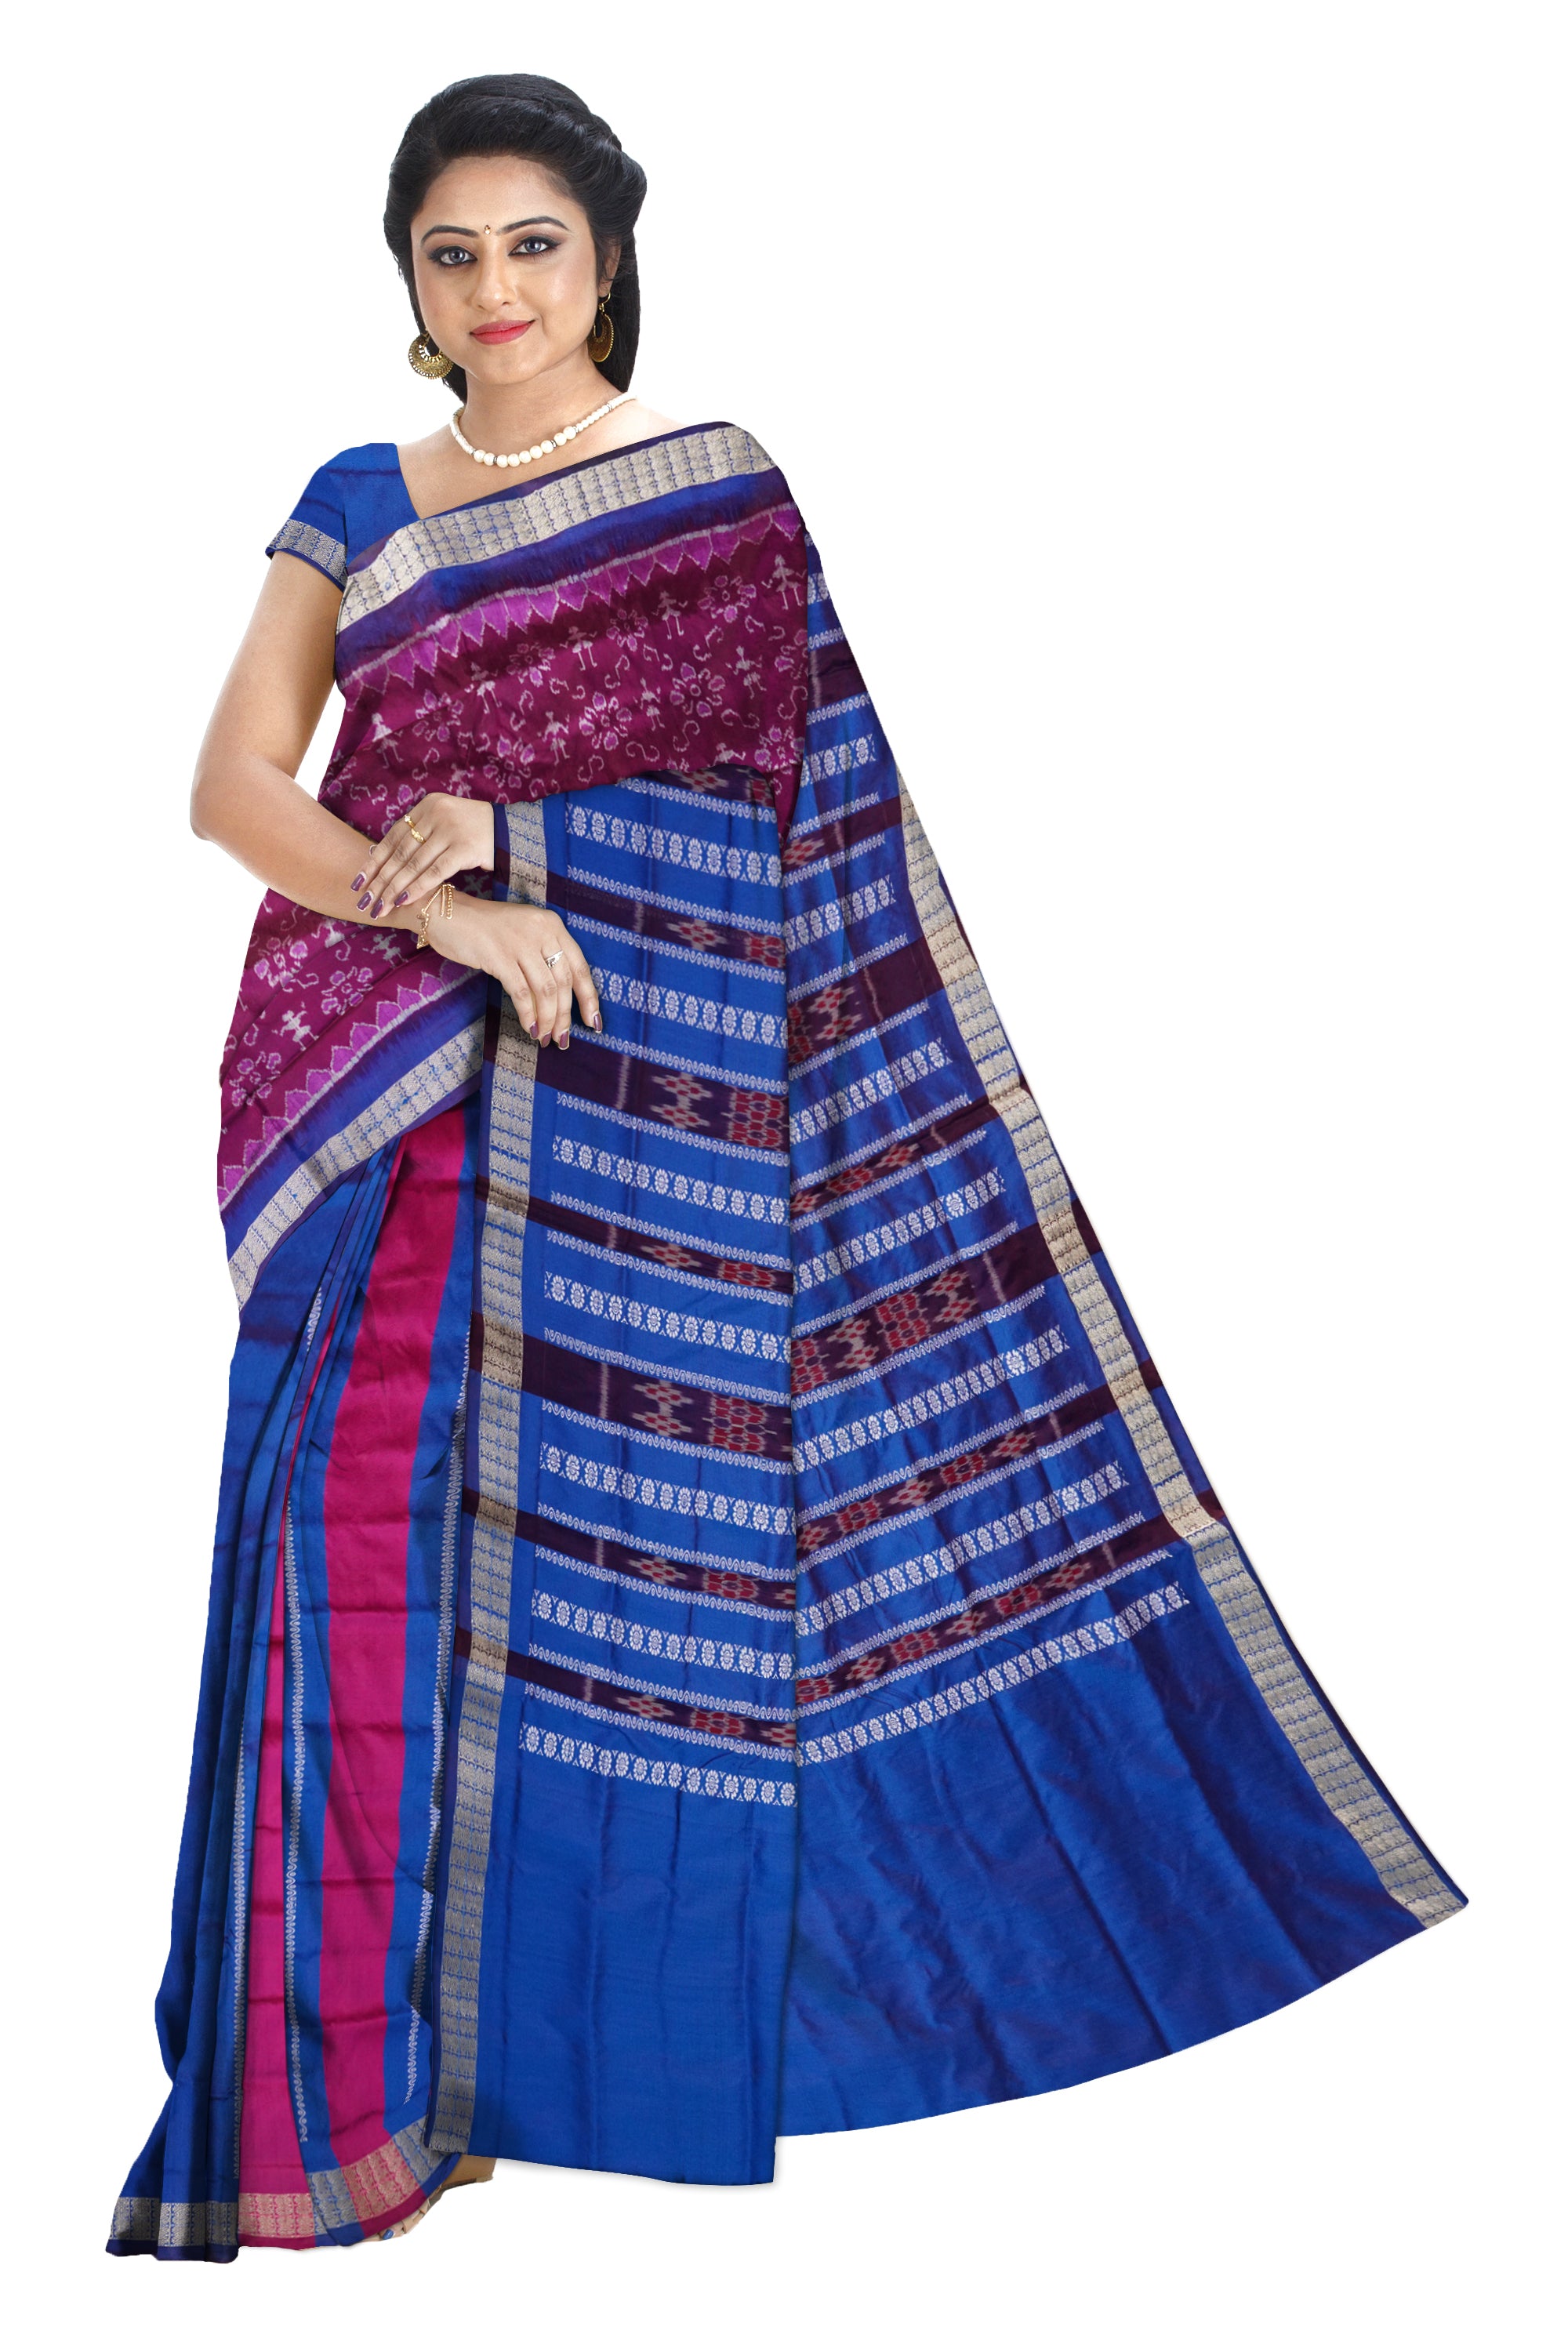 Purple and Blue terracotta patli pata saree with floral pattern, includes matching blouse for a coordinated ensemble. - Koshali Arts & Crafts Enterprise